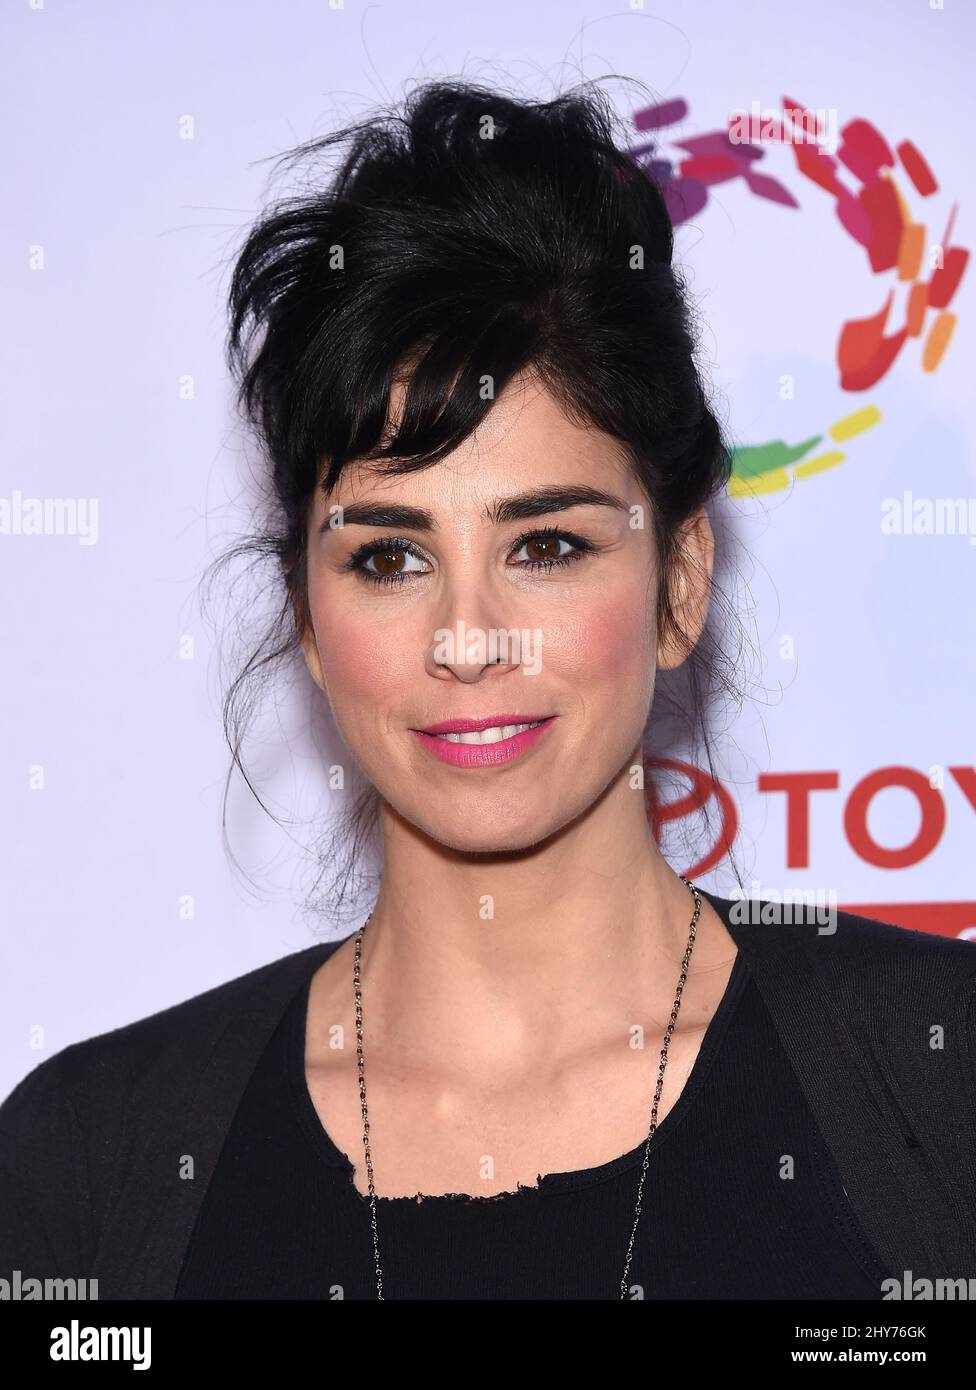 Sarah Silverman attends An Evening With Women held at the Palladium. Stock Photo